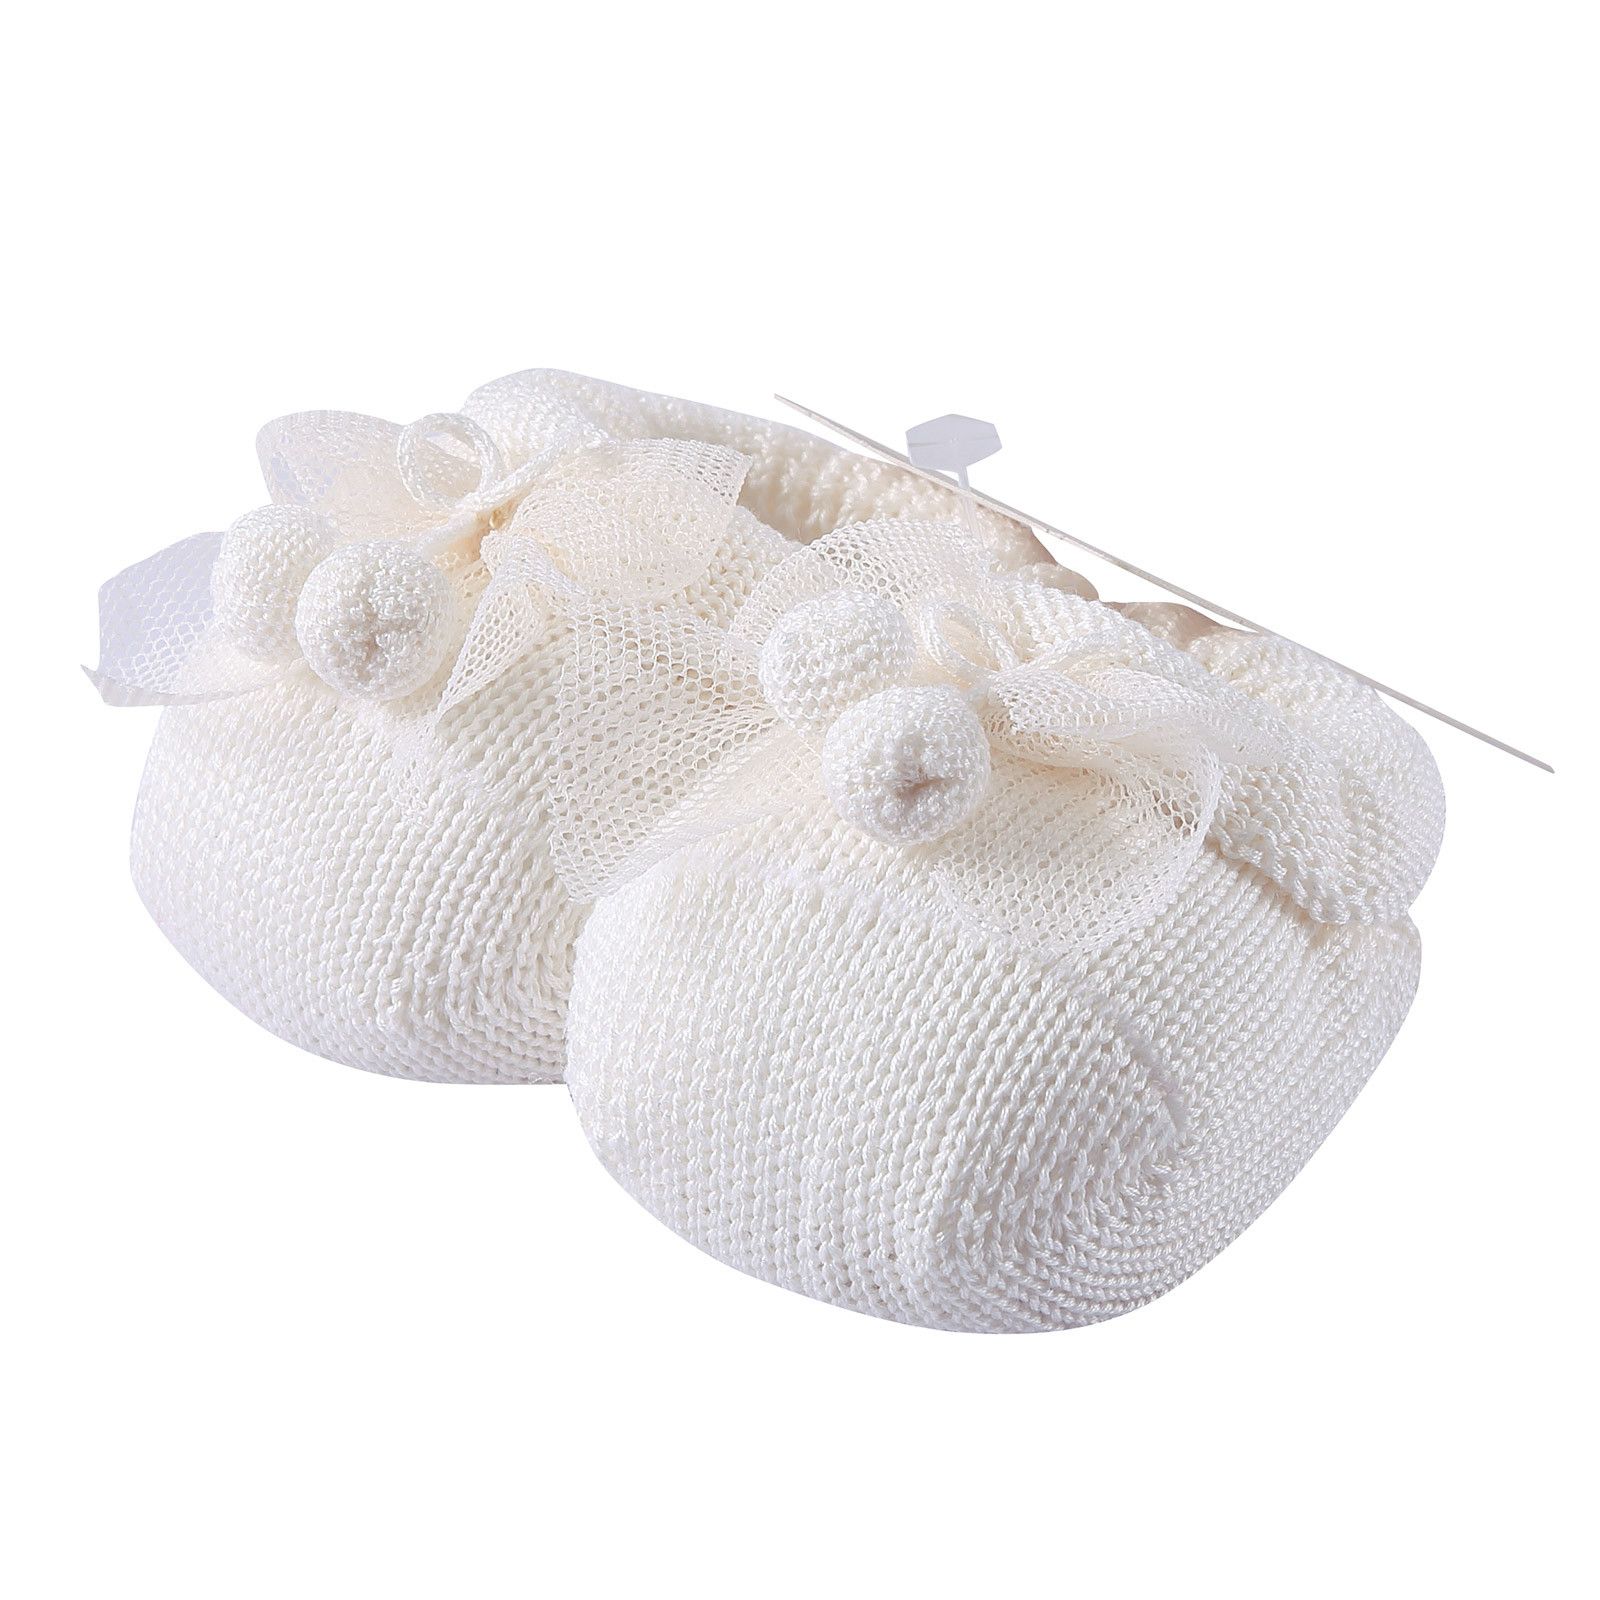 Baby White Knitted Cotton Shoes&Hair Band Gift Set - CÉMAROSE | Children's Fashion Store - 2